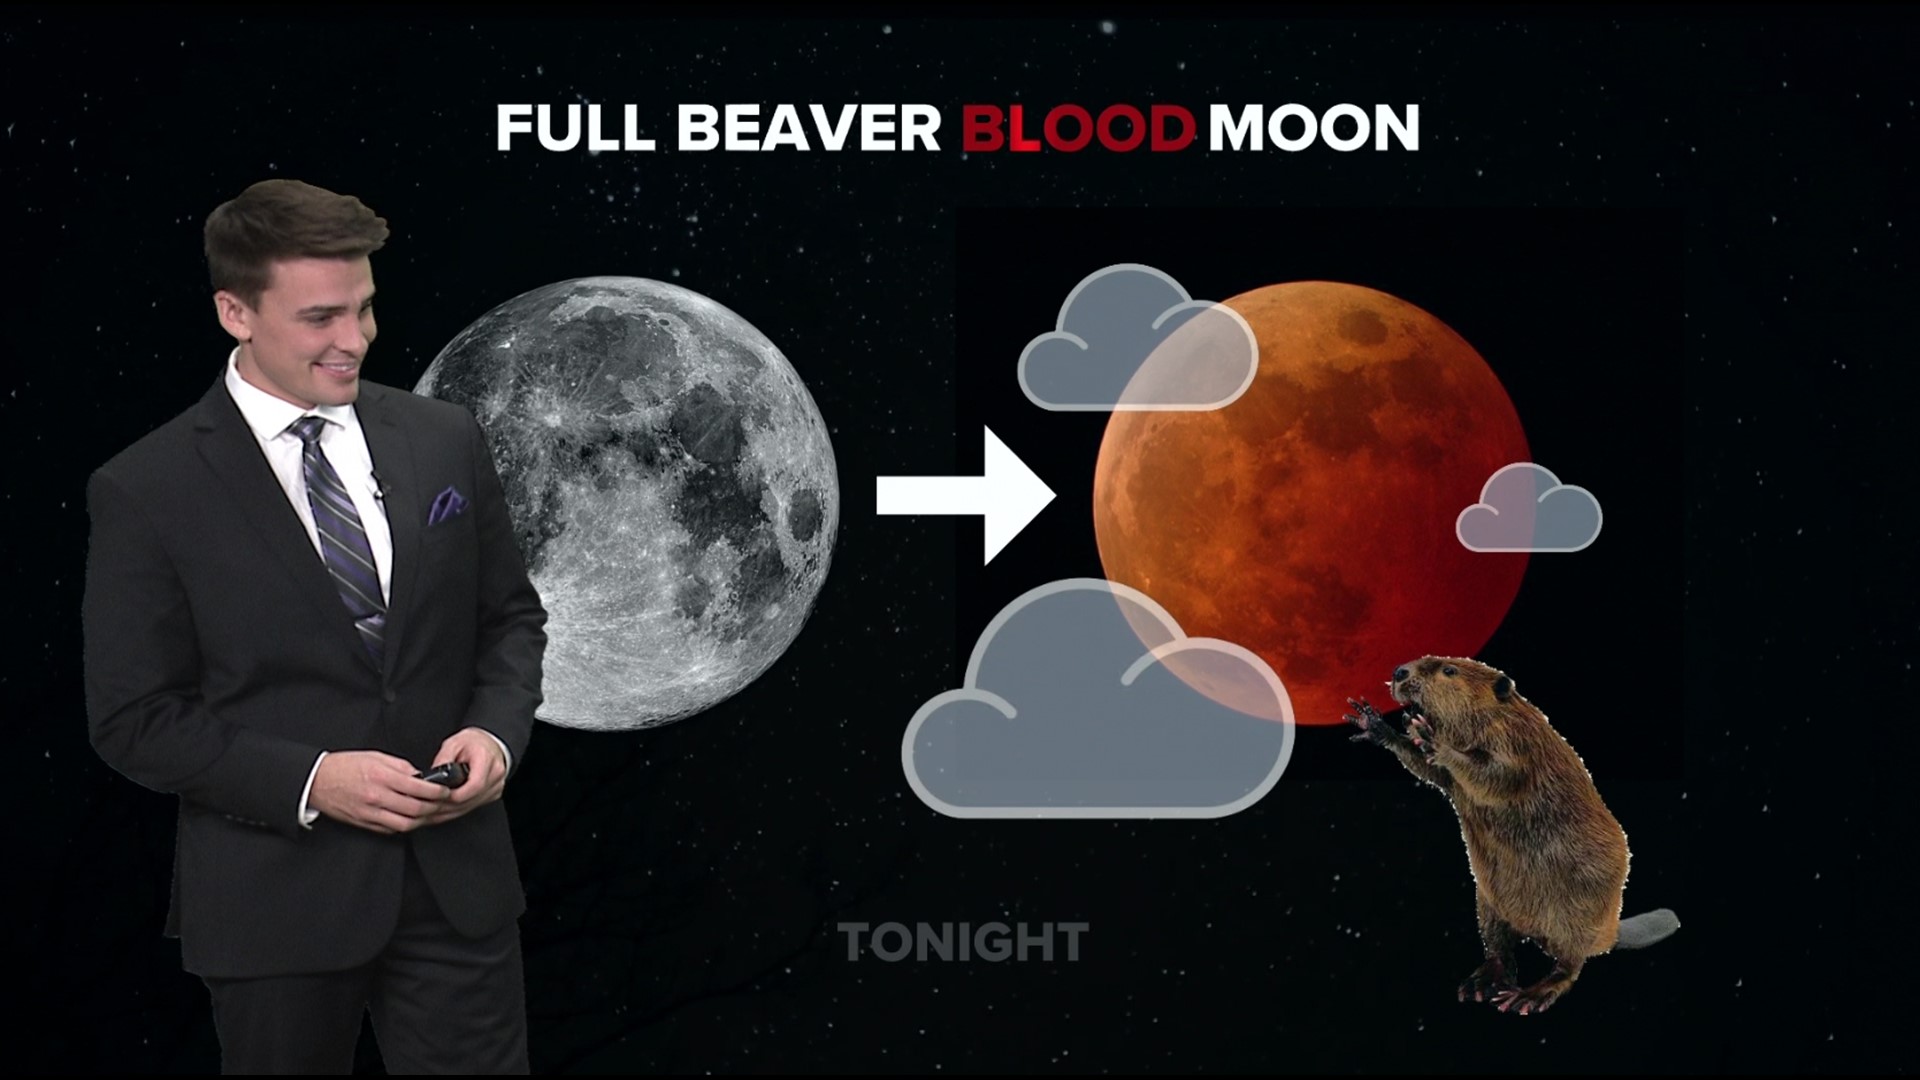 Clouds will thicken up across the western and central U.S. making the lunar eclipse more difficult to see.